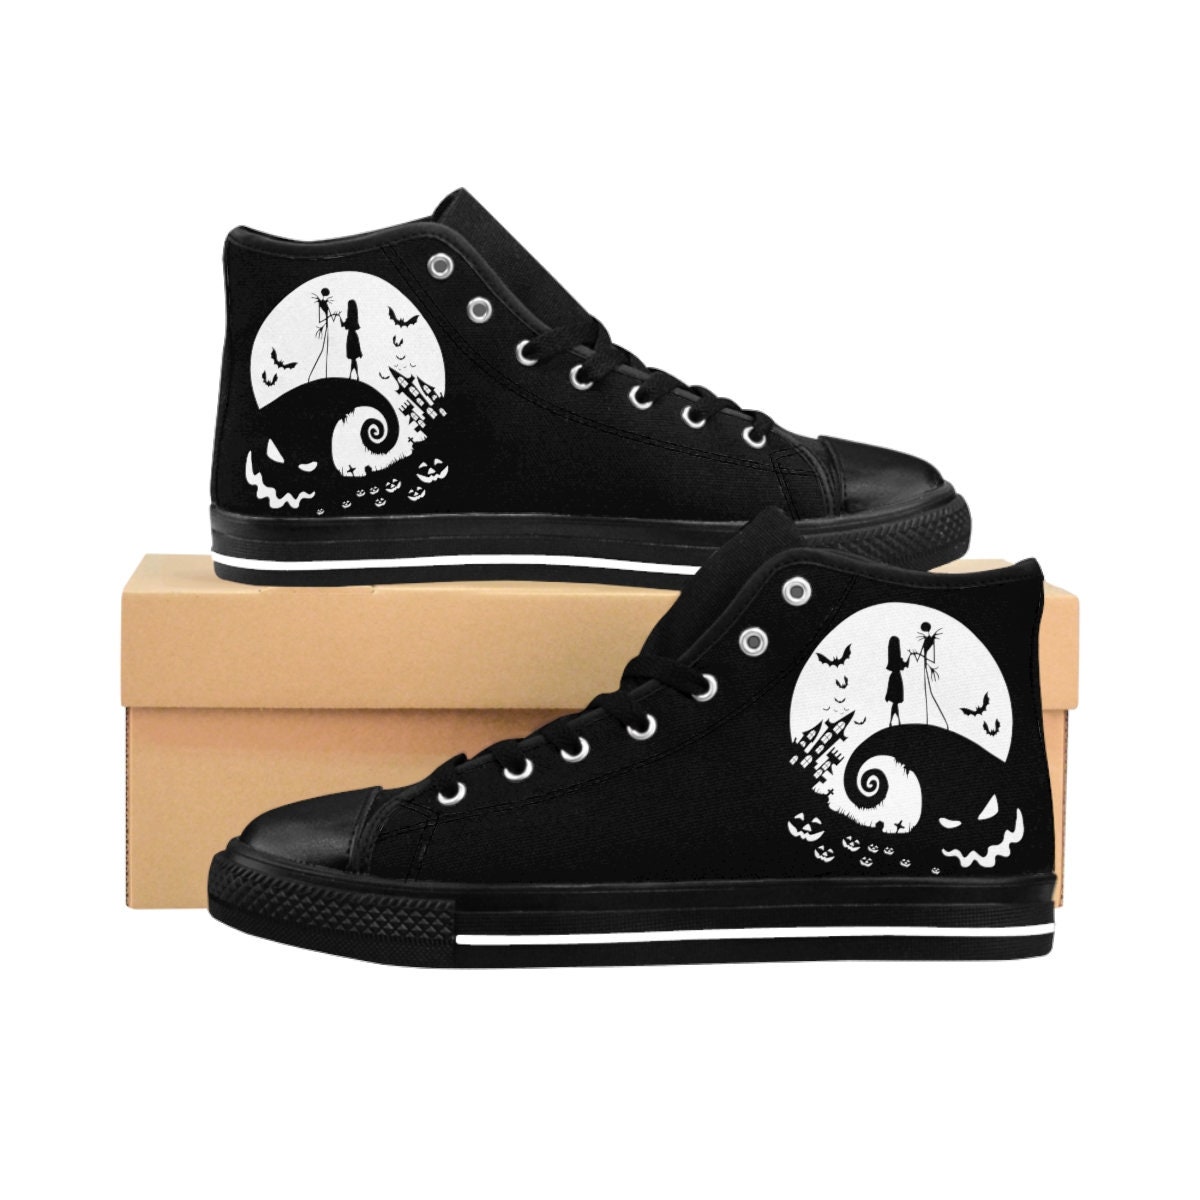 Discover Men's Nightmare Before Christmas Sneakers